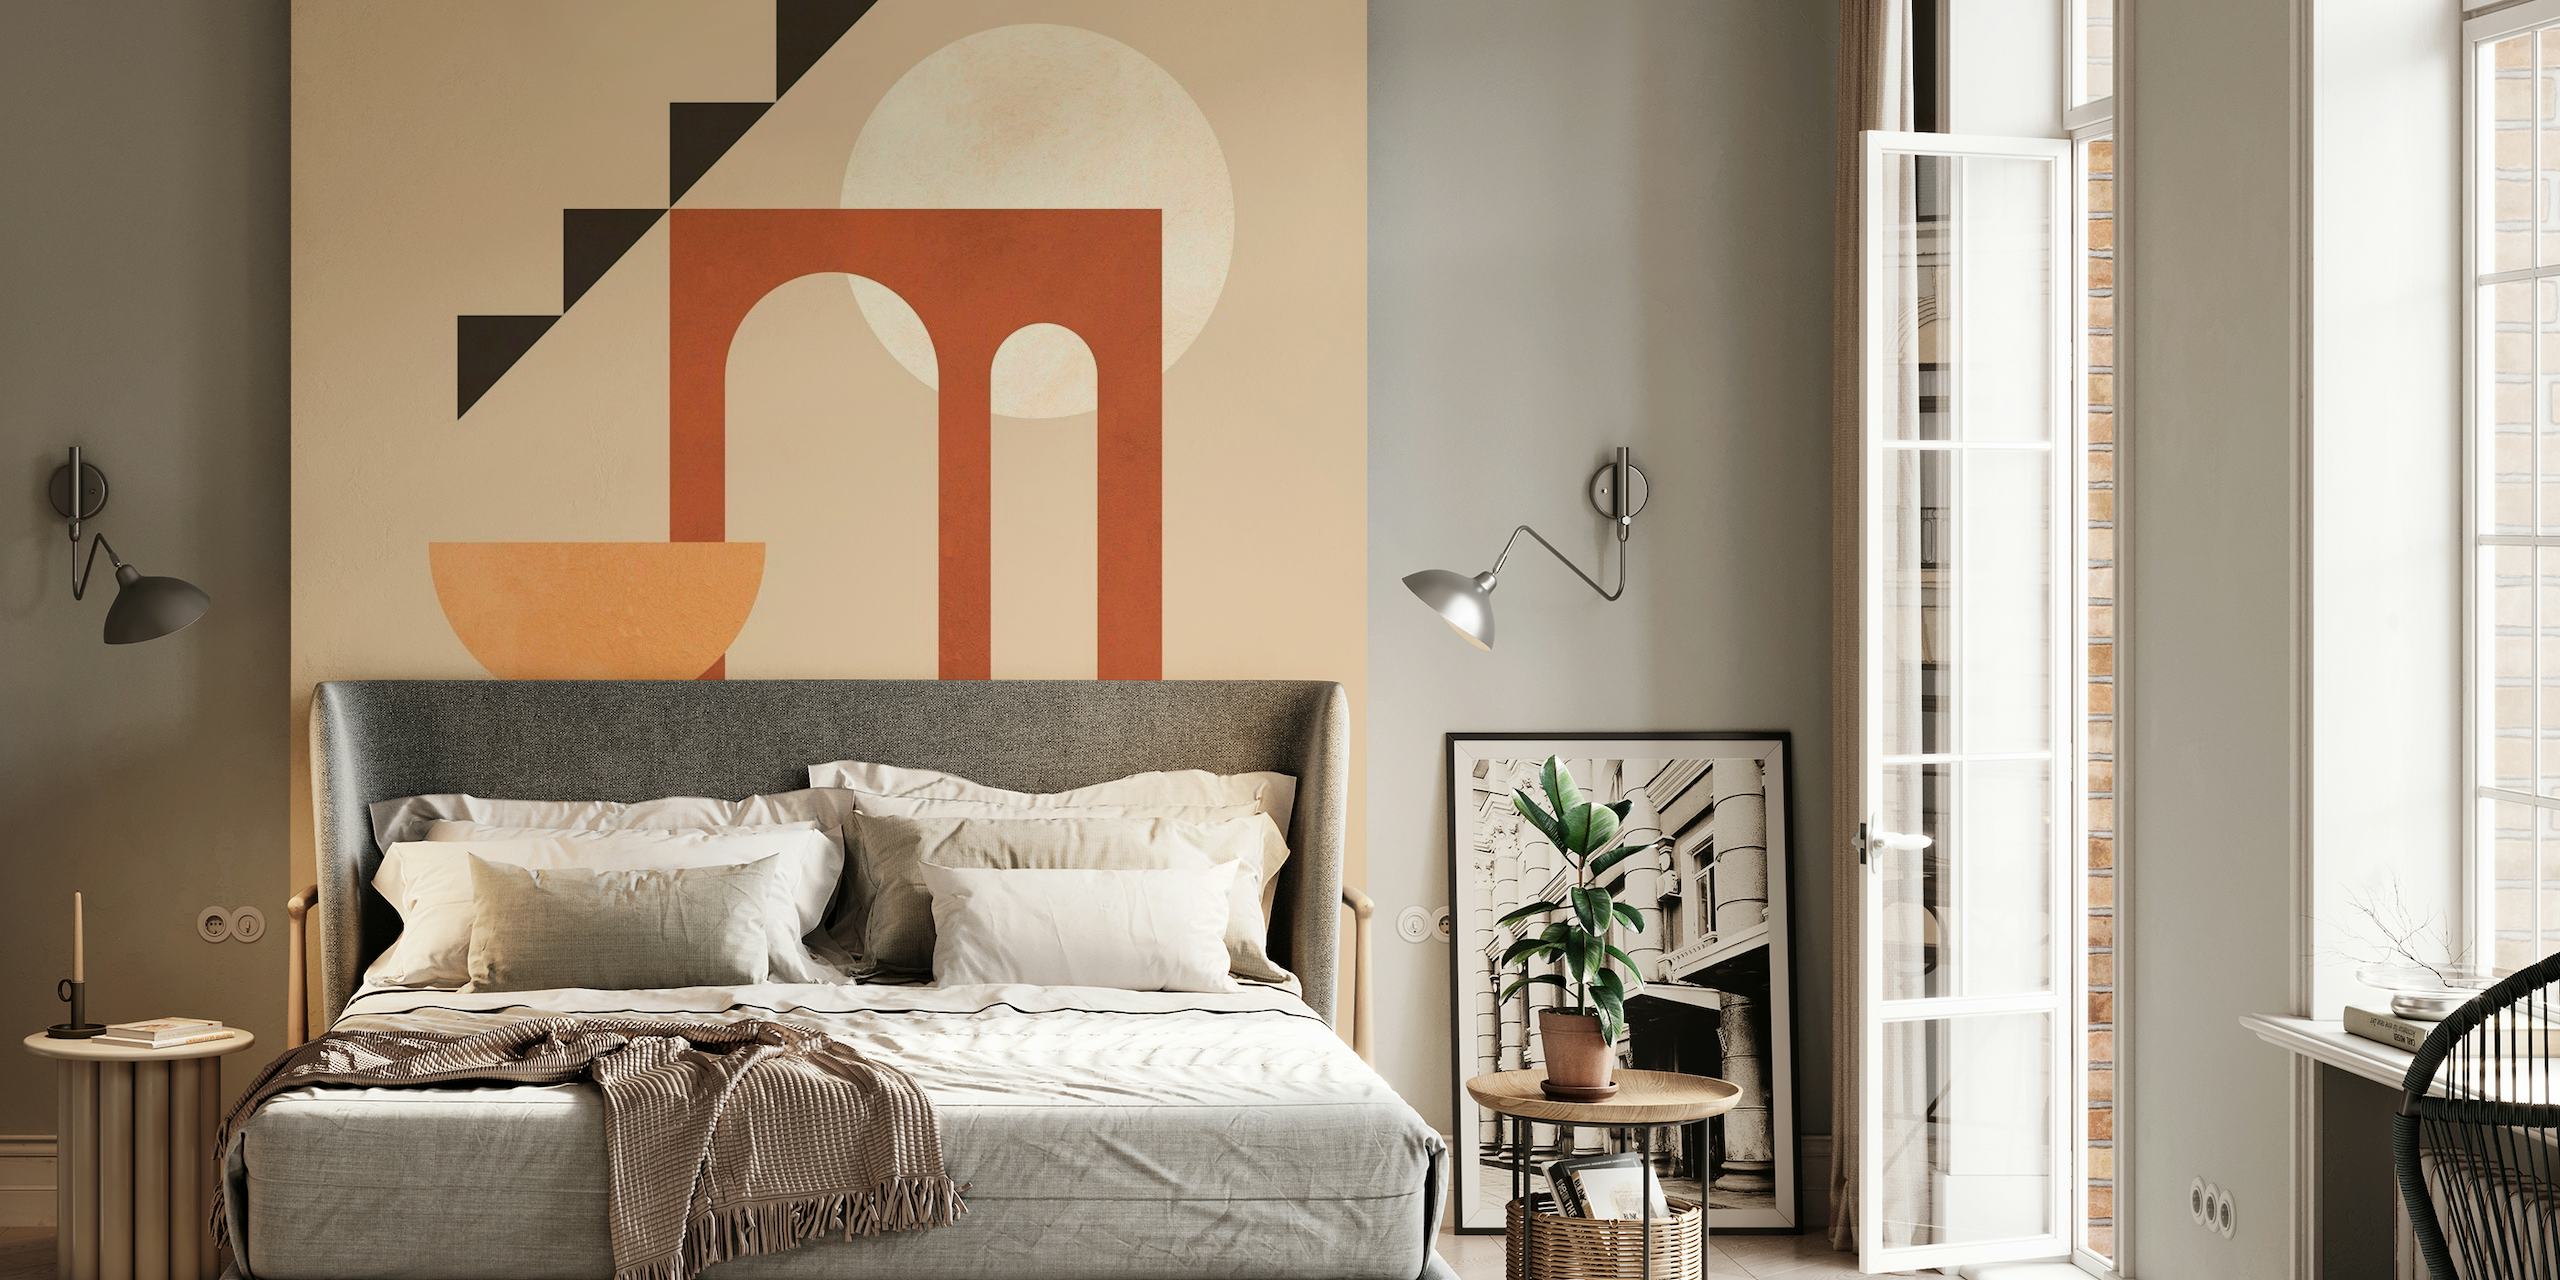 Minimalist architectural abstract mural with geometric shapes and earthy tones